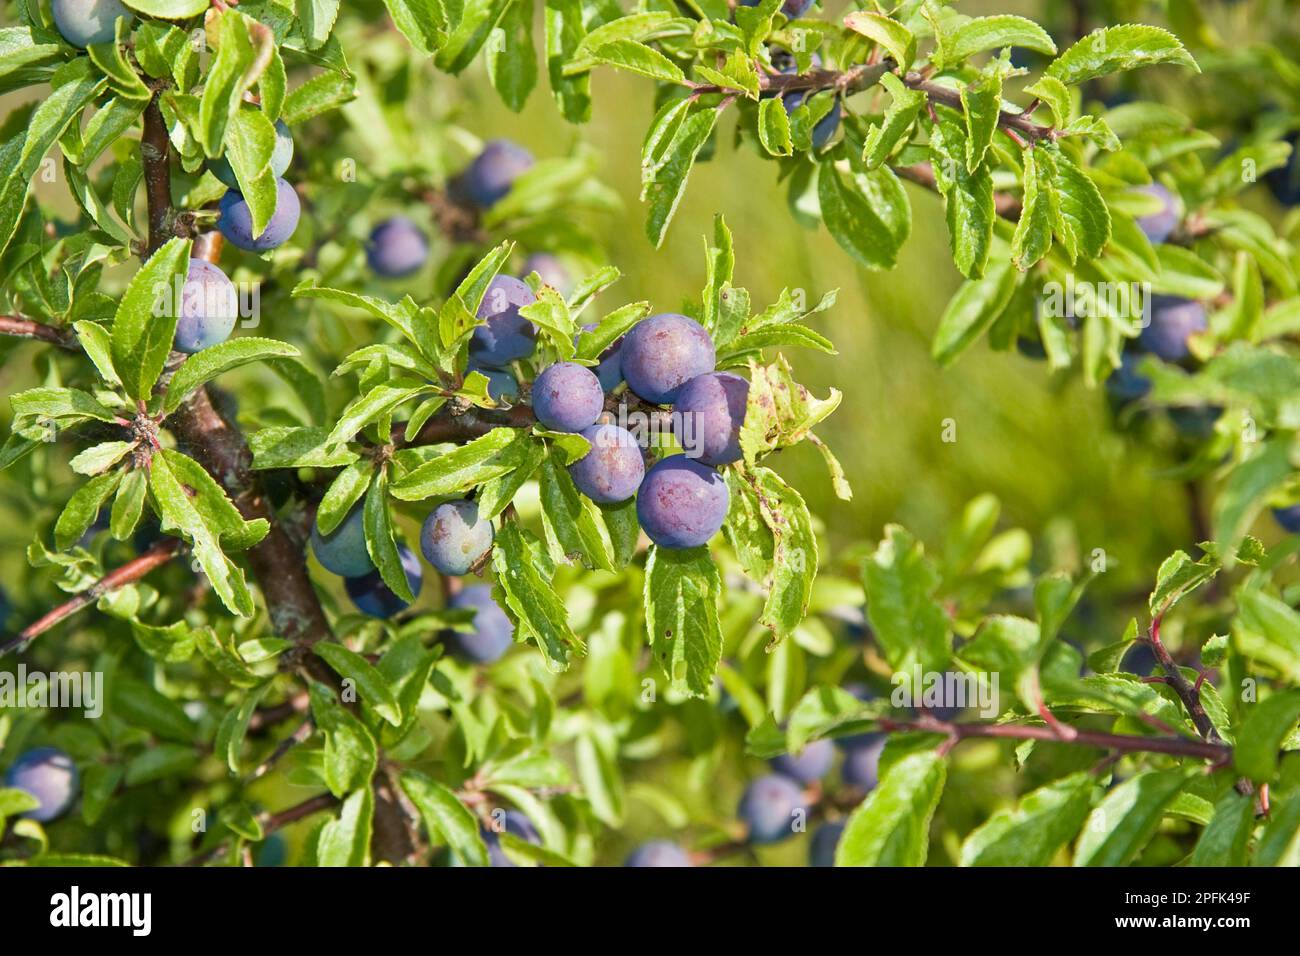 Blackthorn (Prunus spinosa) close-up of fruit and leaves, Dorset, England, United Kingdom Stock Photo